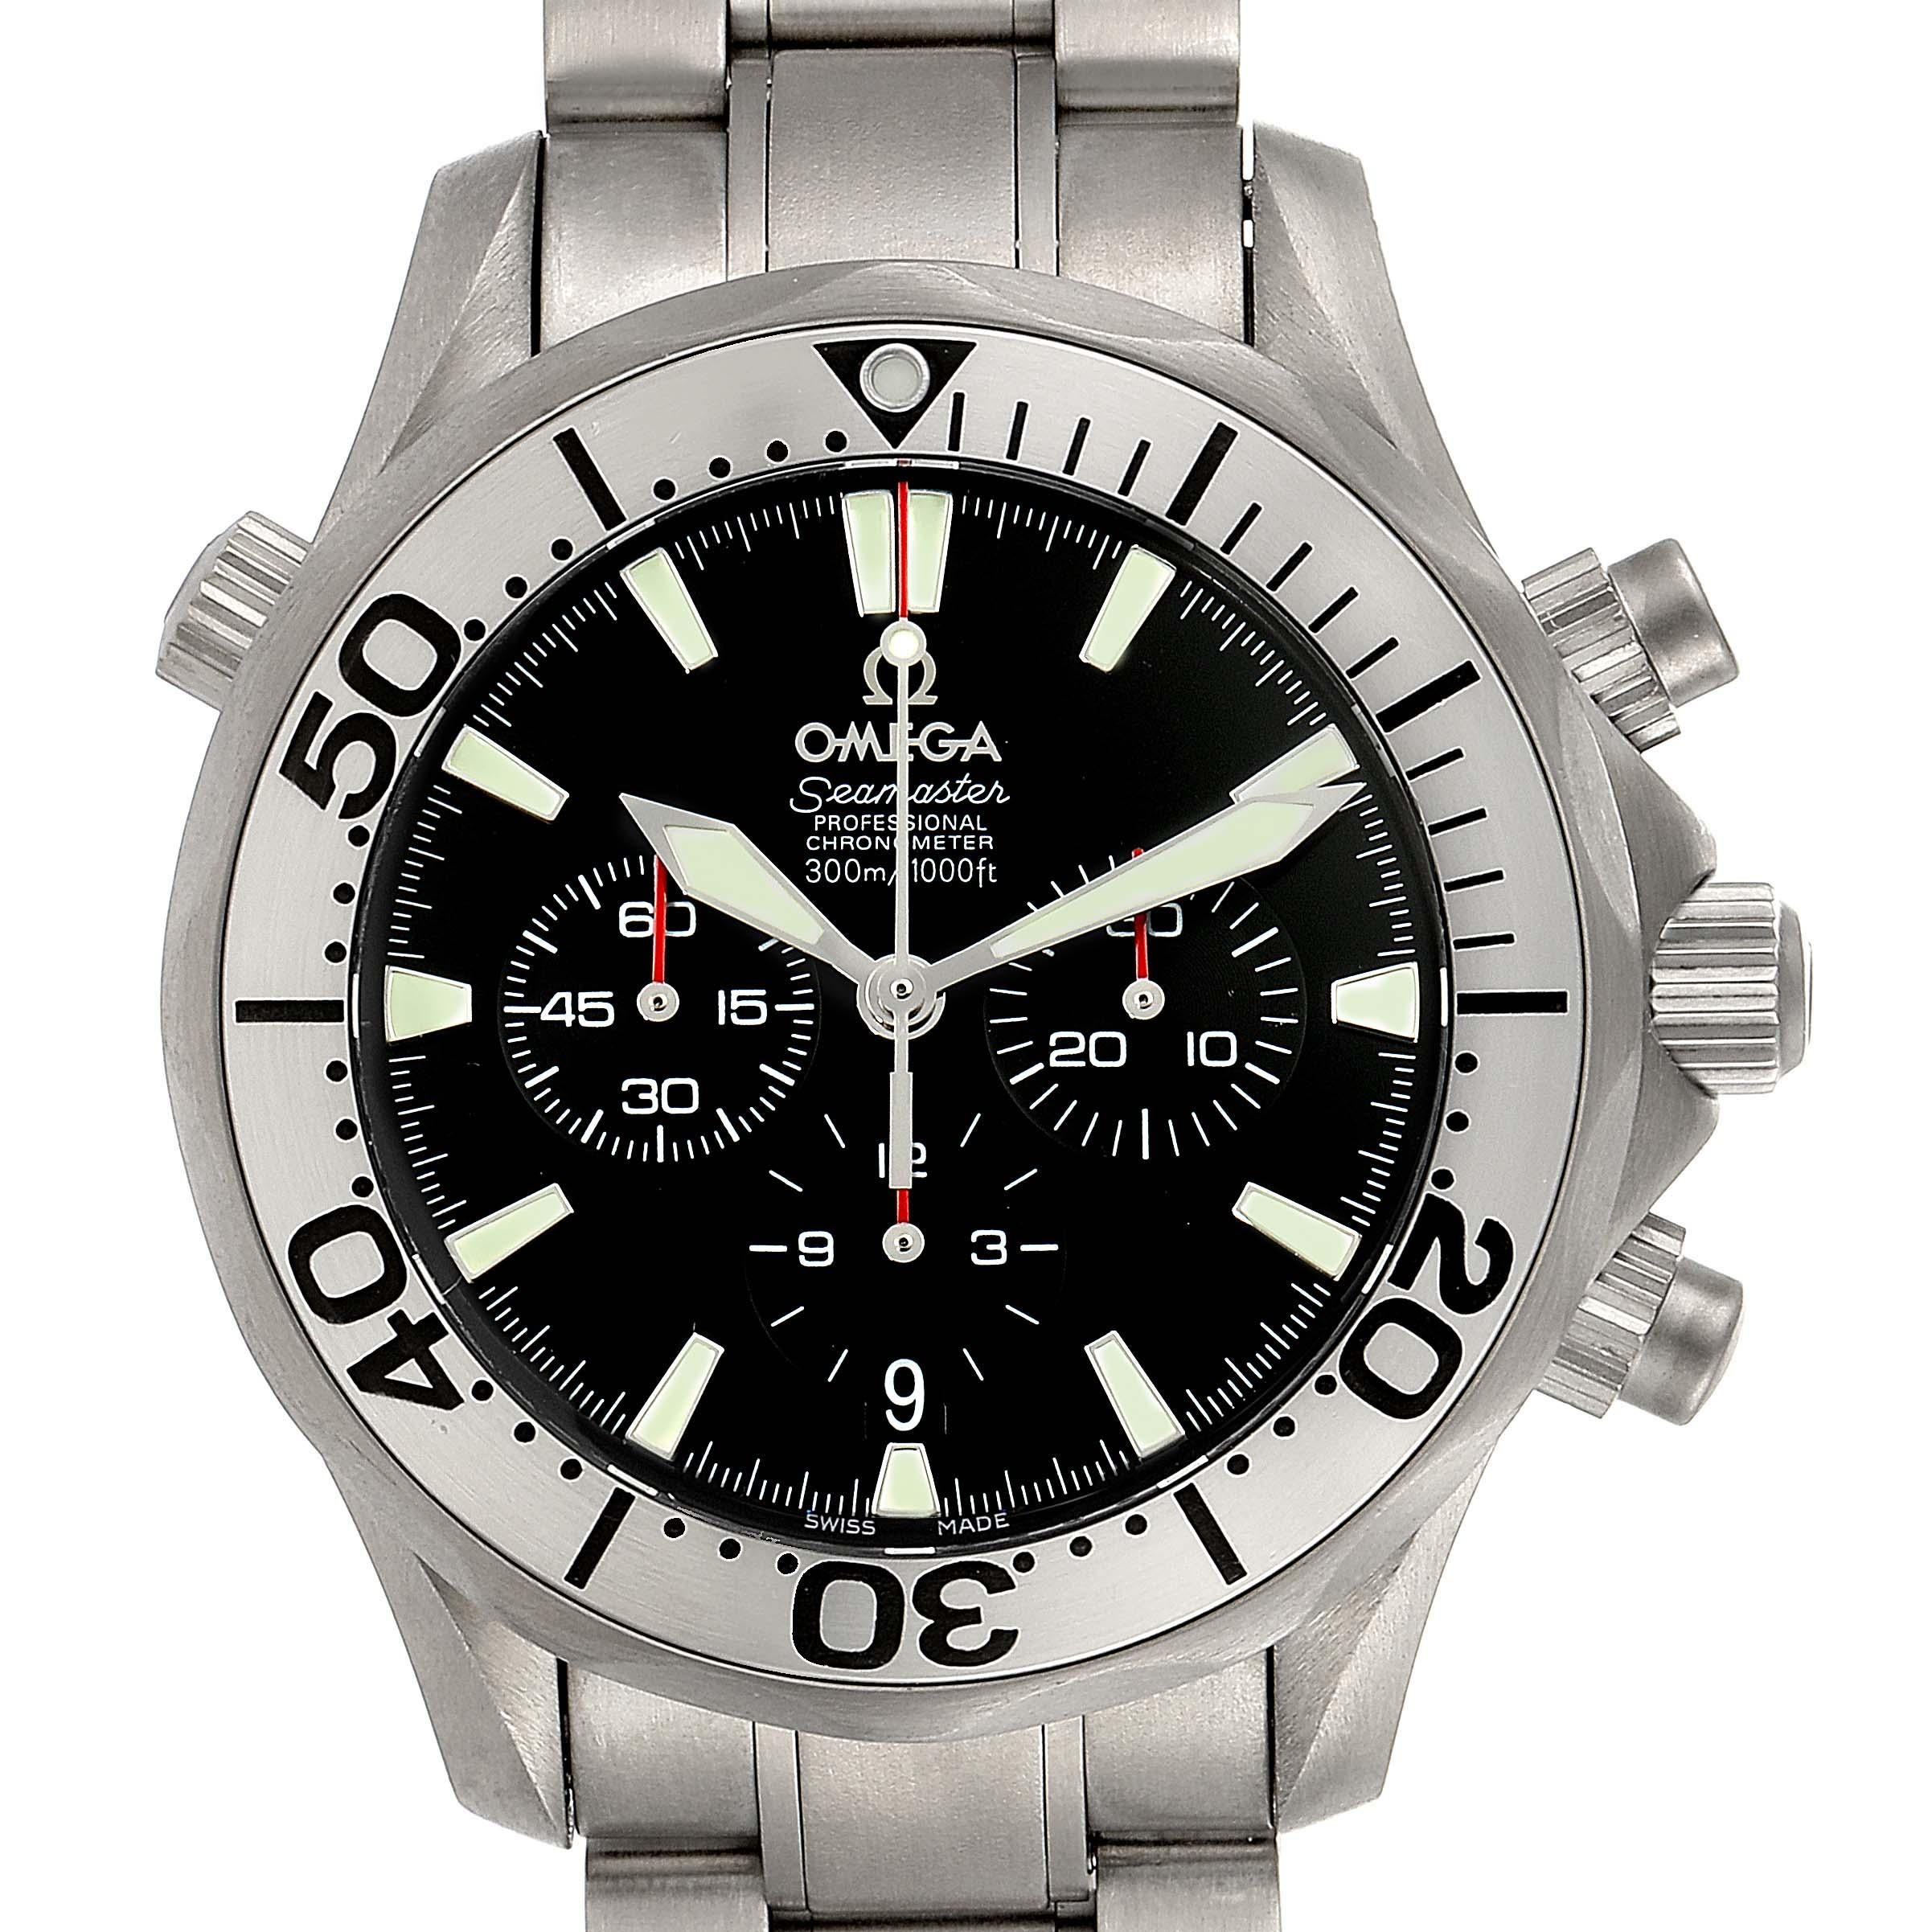 Omega Seamaster 300M Diver Chronograph Titanium Mens Watch 2293.52.00. Officially certified chronometer automatic self-winding movement. Chronograph function. Caliber 3301. Titanium case 41.5 mm in diameter. Omega logo on a crown. Unidirectional